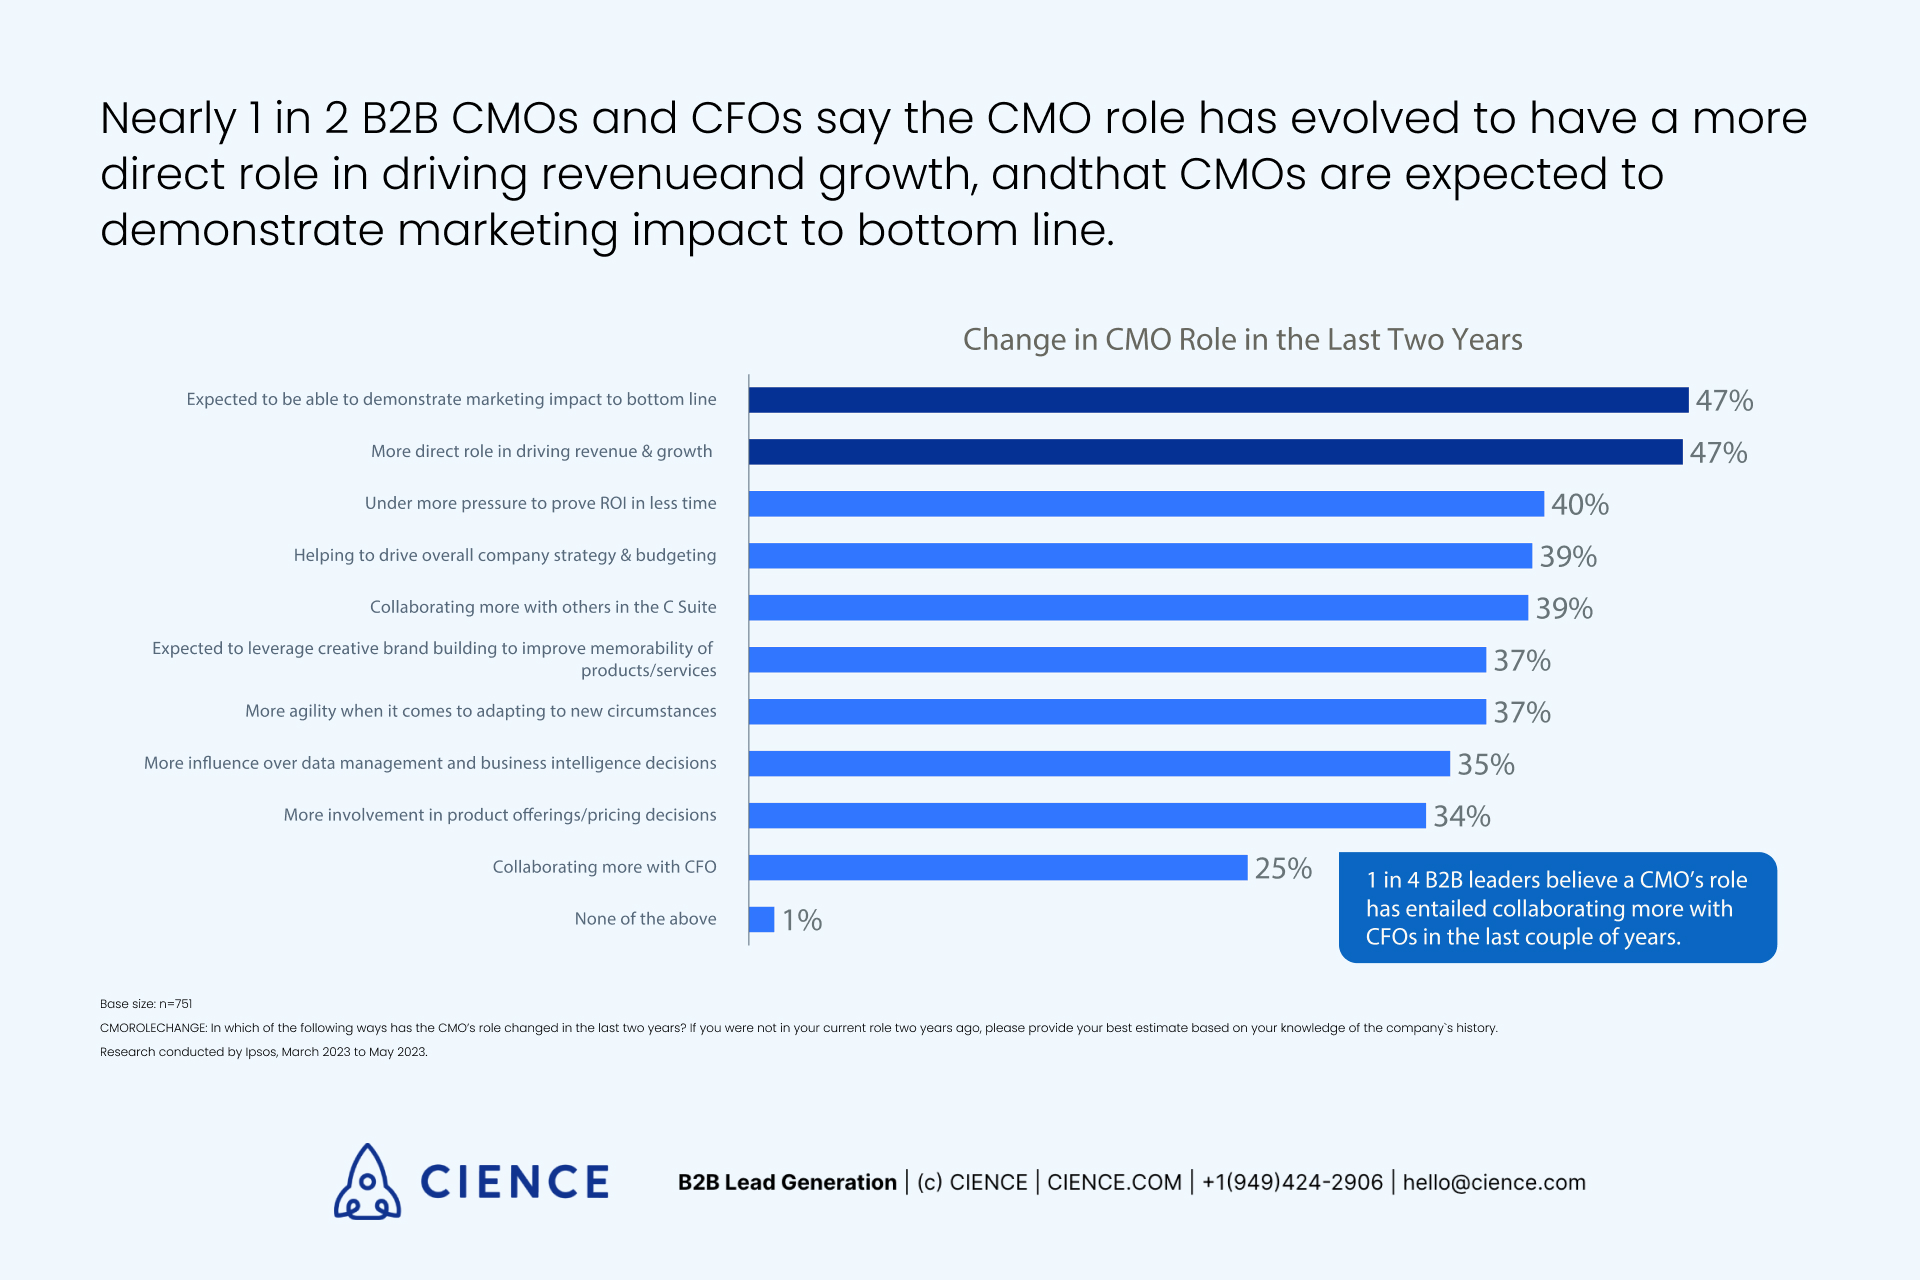 Linkedin’s B2B Marketing Benchmark Report 2023: Change in CMO Role in the Last Two Years